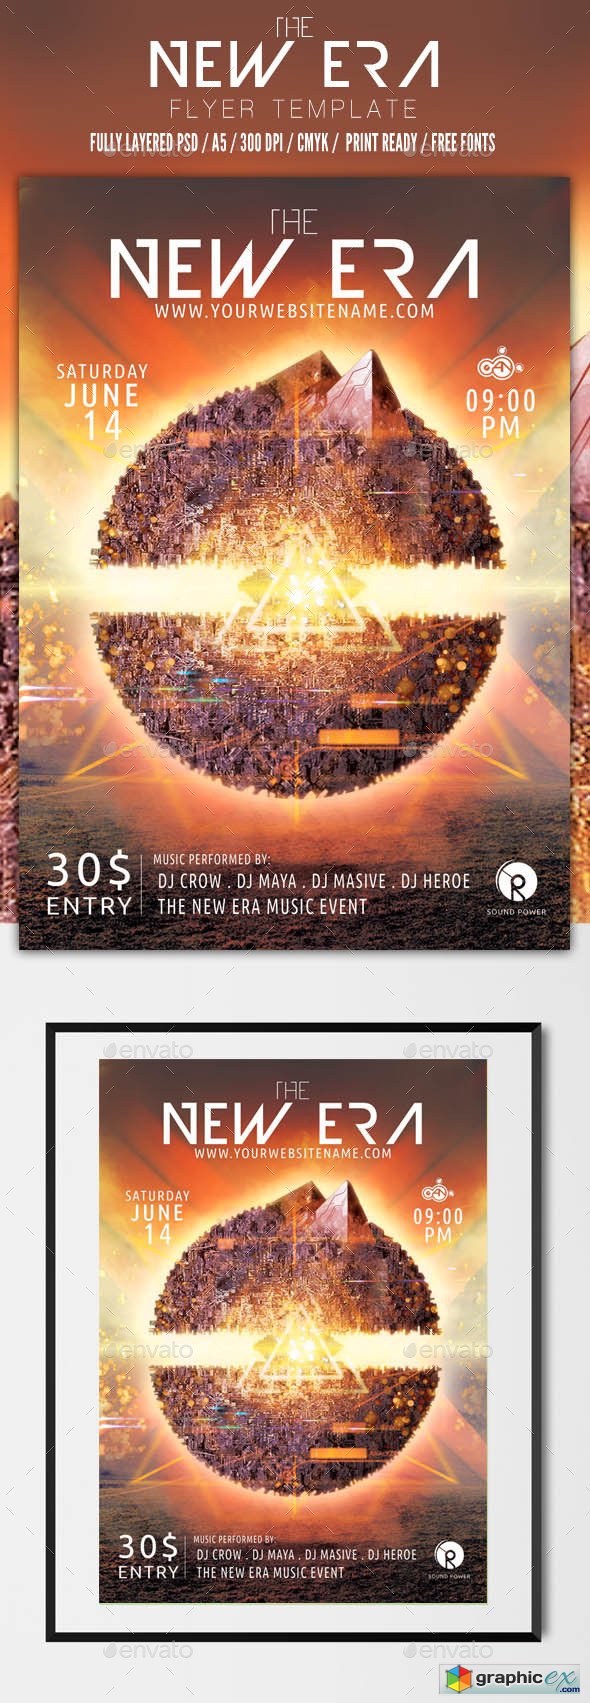 The new era flyer template